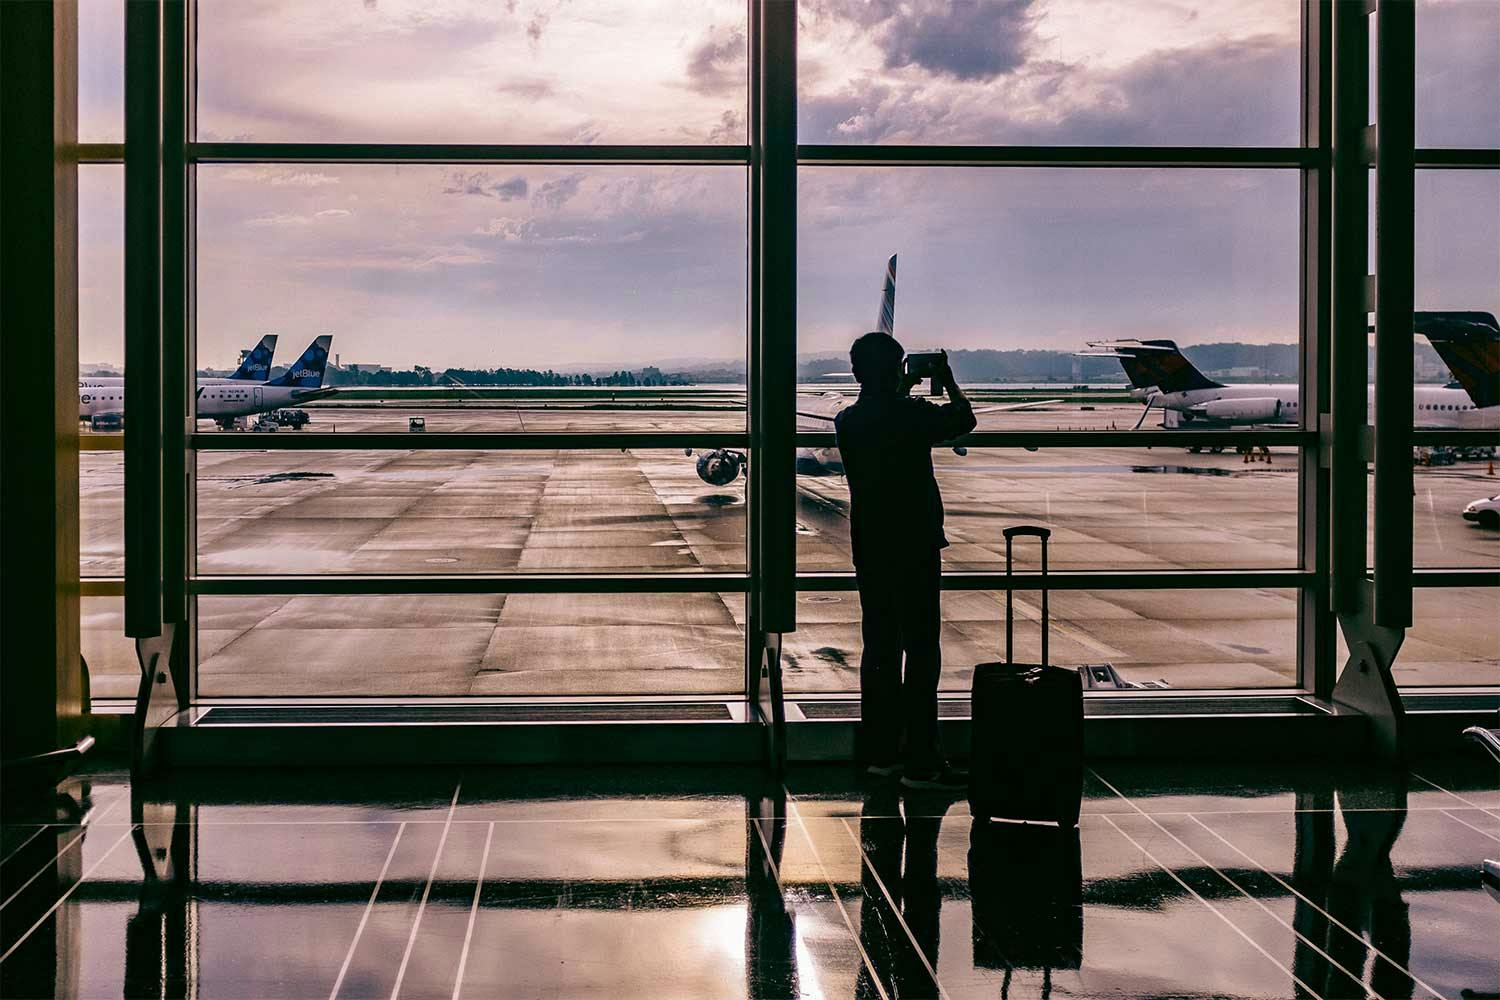 A person uses their phone to take a photo of airplanes sitting on tarmac through a large airport window.